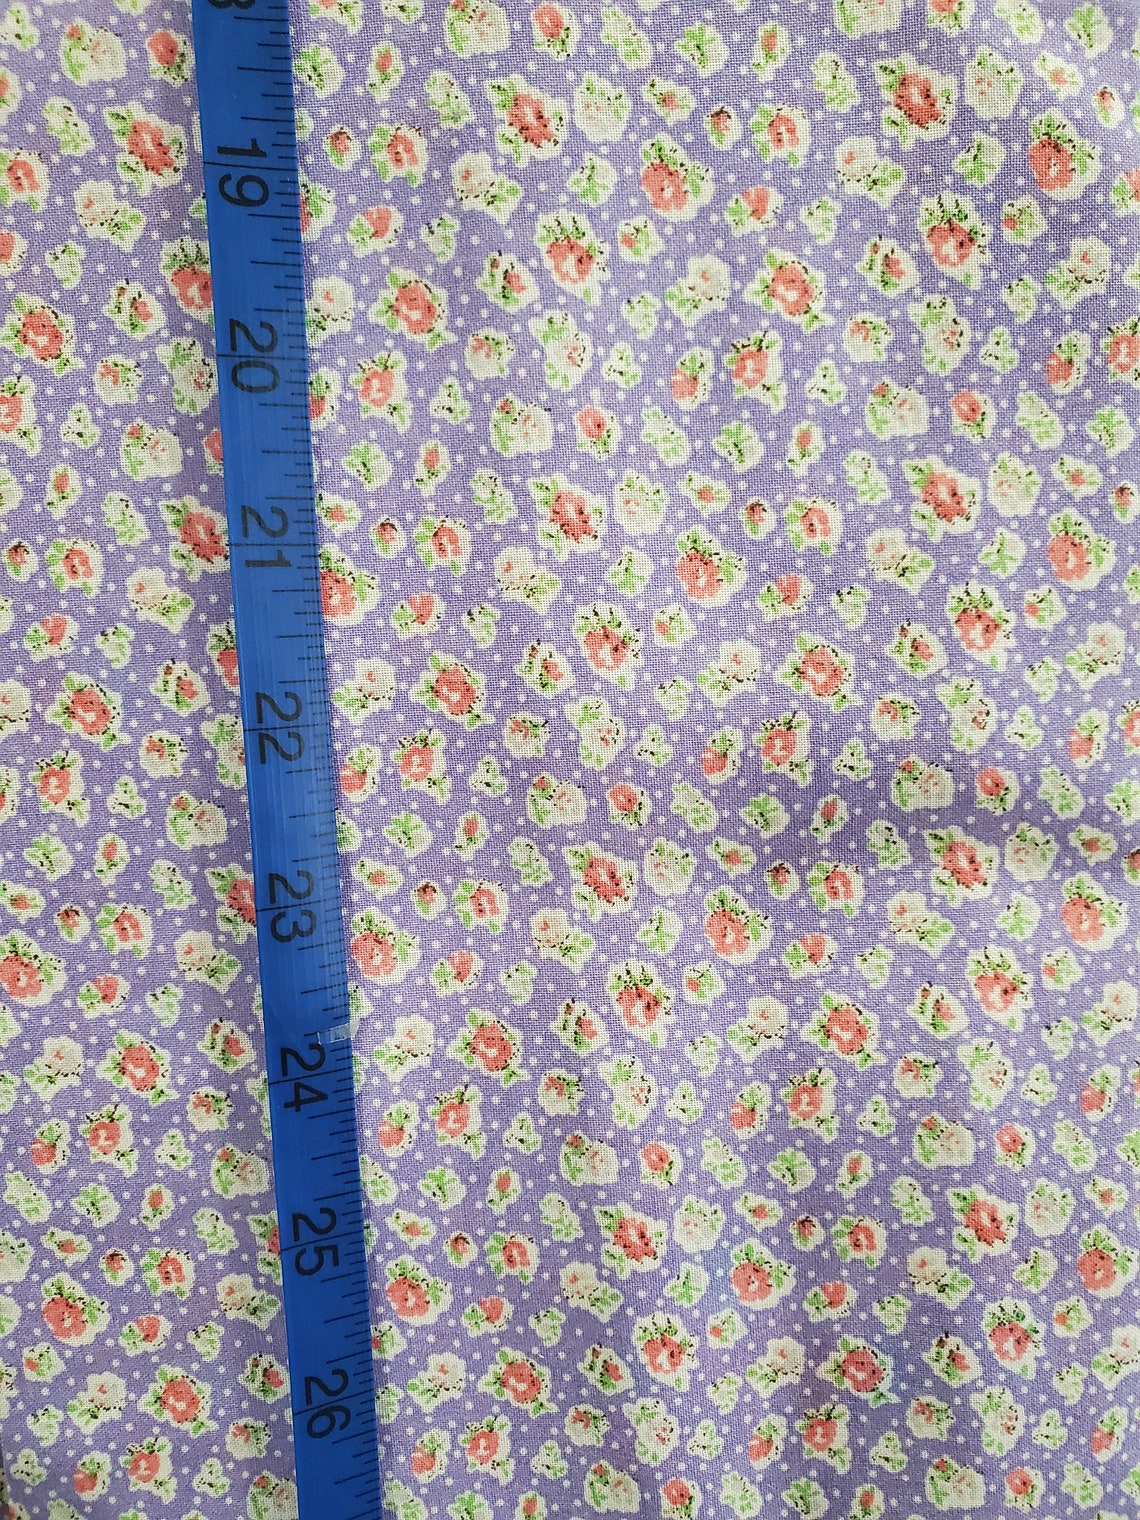 Vintage Treasures From the Attic Purple Calico Floral Fabric - Etsy